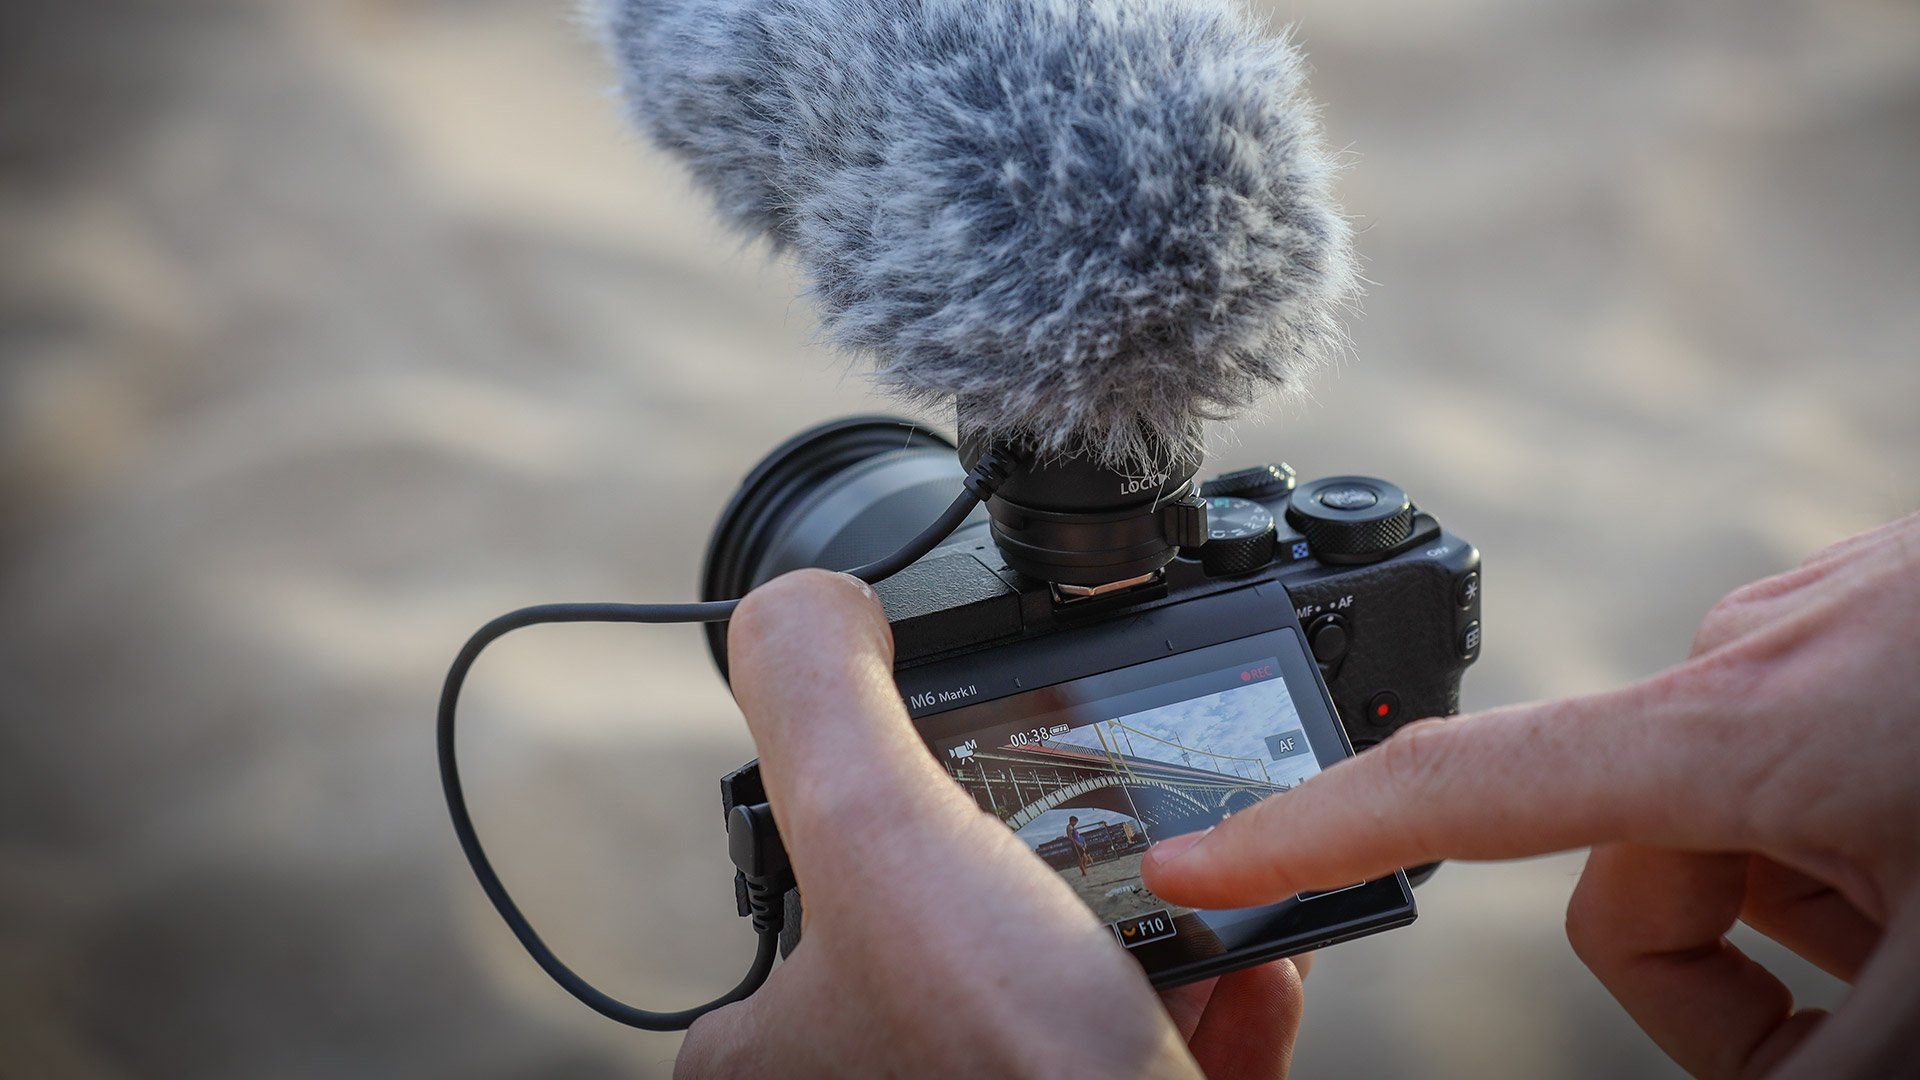 Capture compelling video